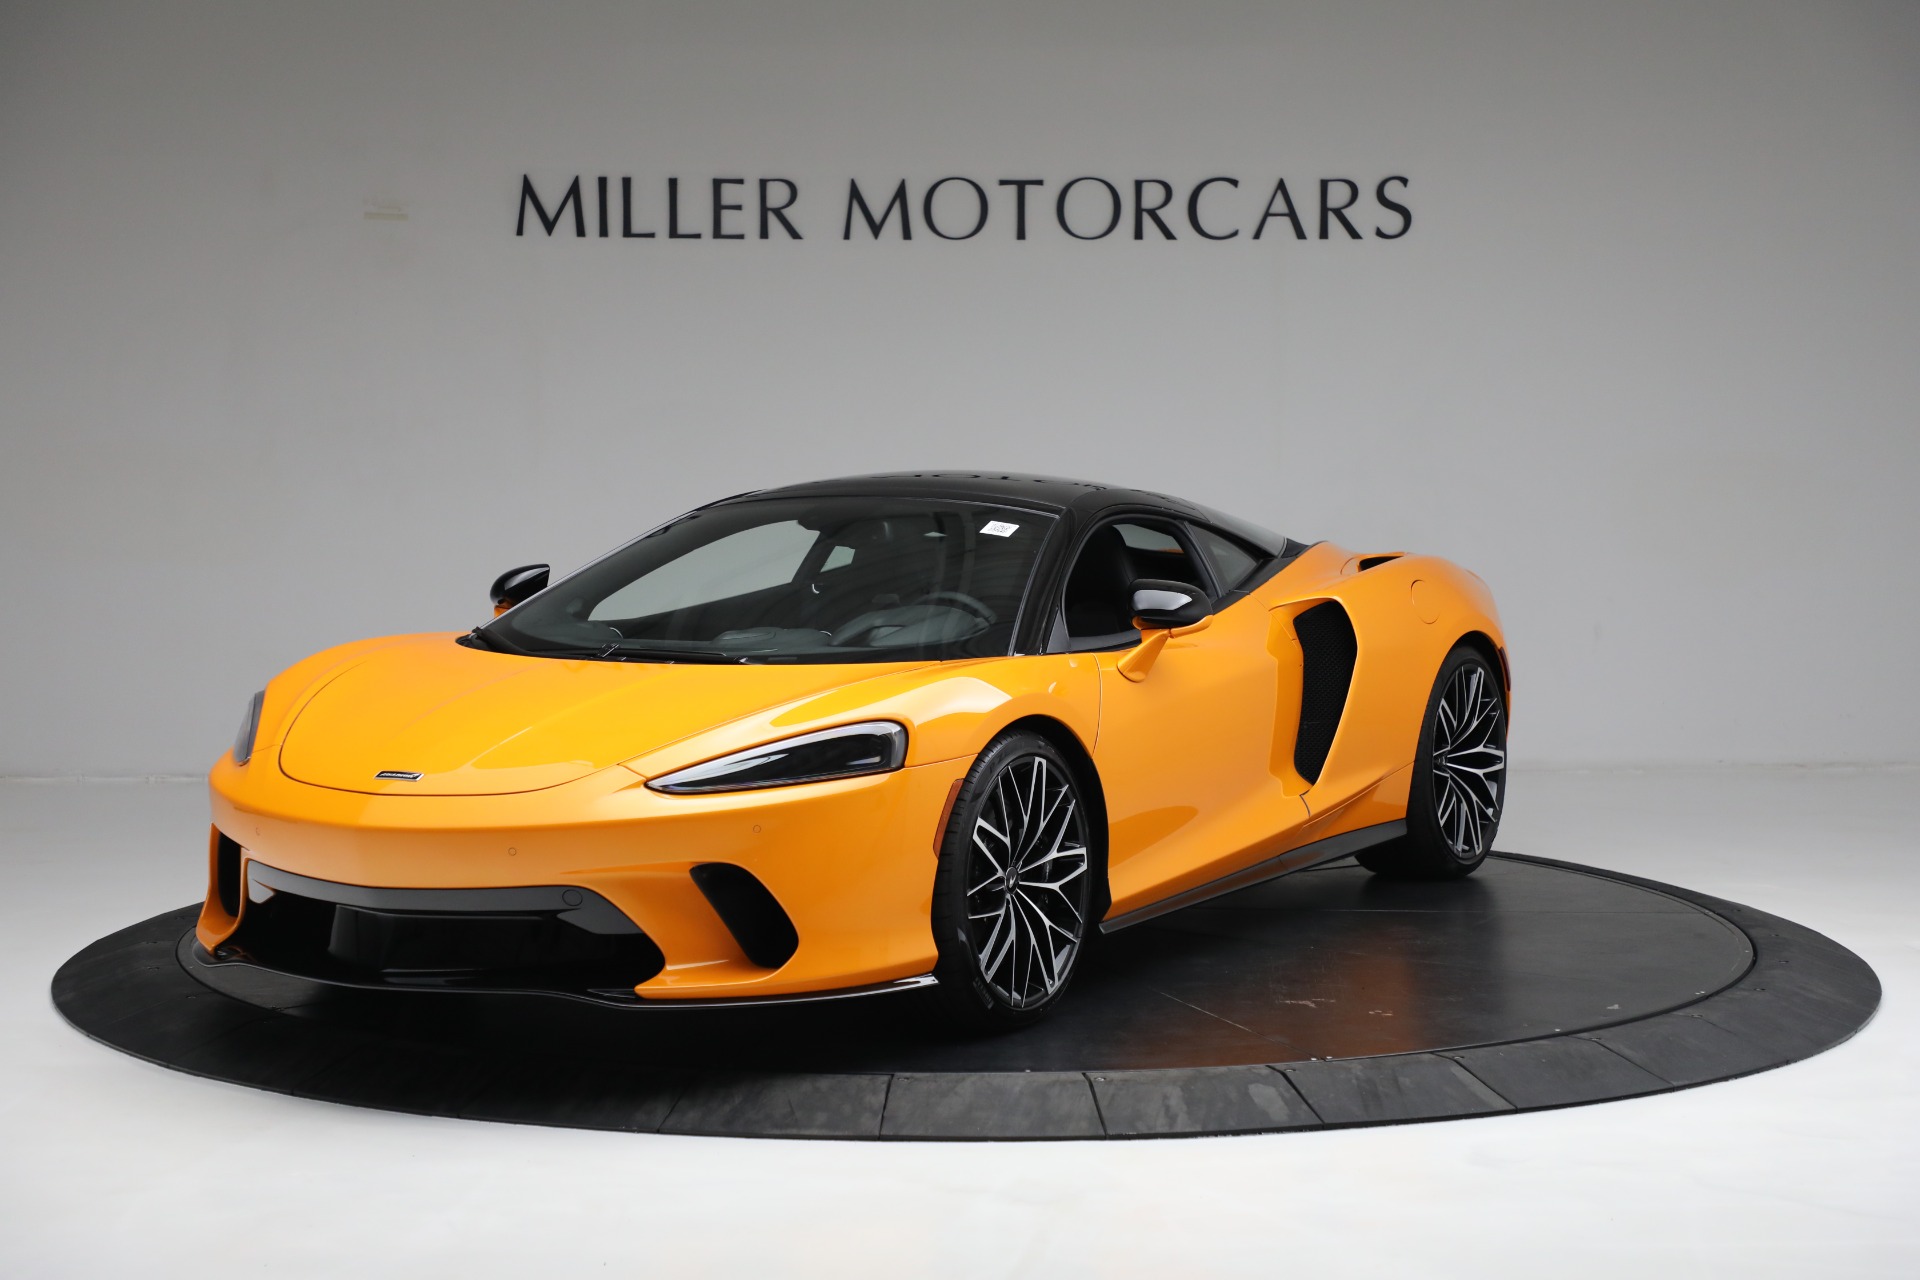 New 2022 McLaren GT for sale $220,800 at Alfa Romeo of Greenwich in Greenwich CT 06830 1